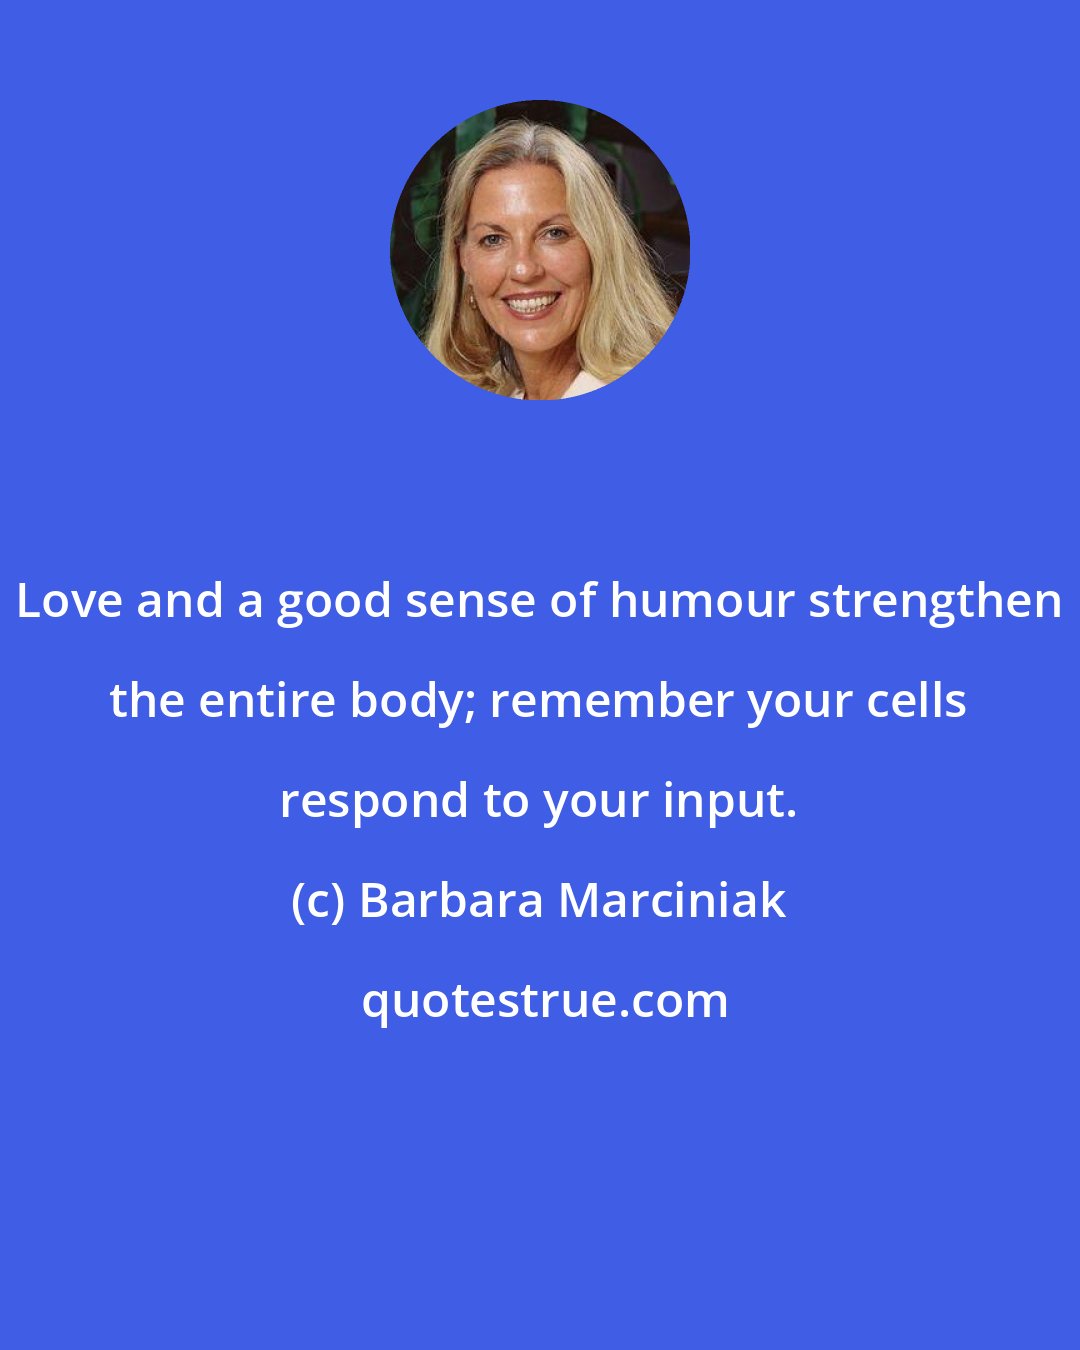 Barbara Marciniak: Love and a good sense of humour strengthen the entire body; remember your cells respond to your input.